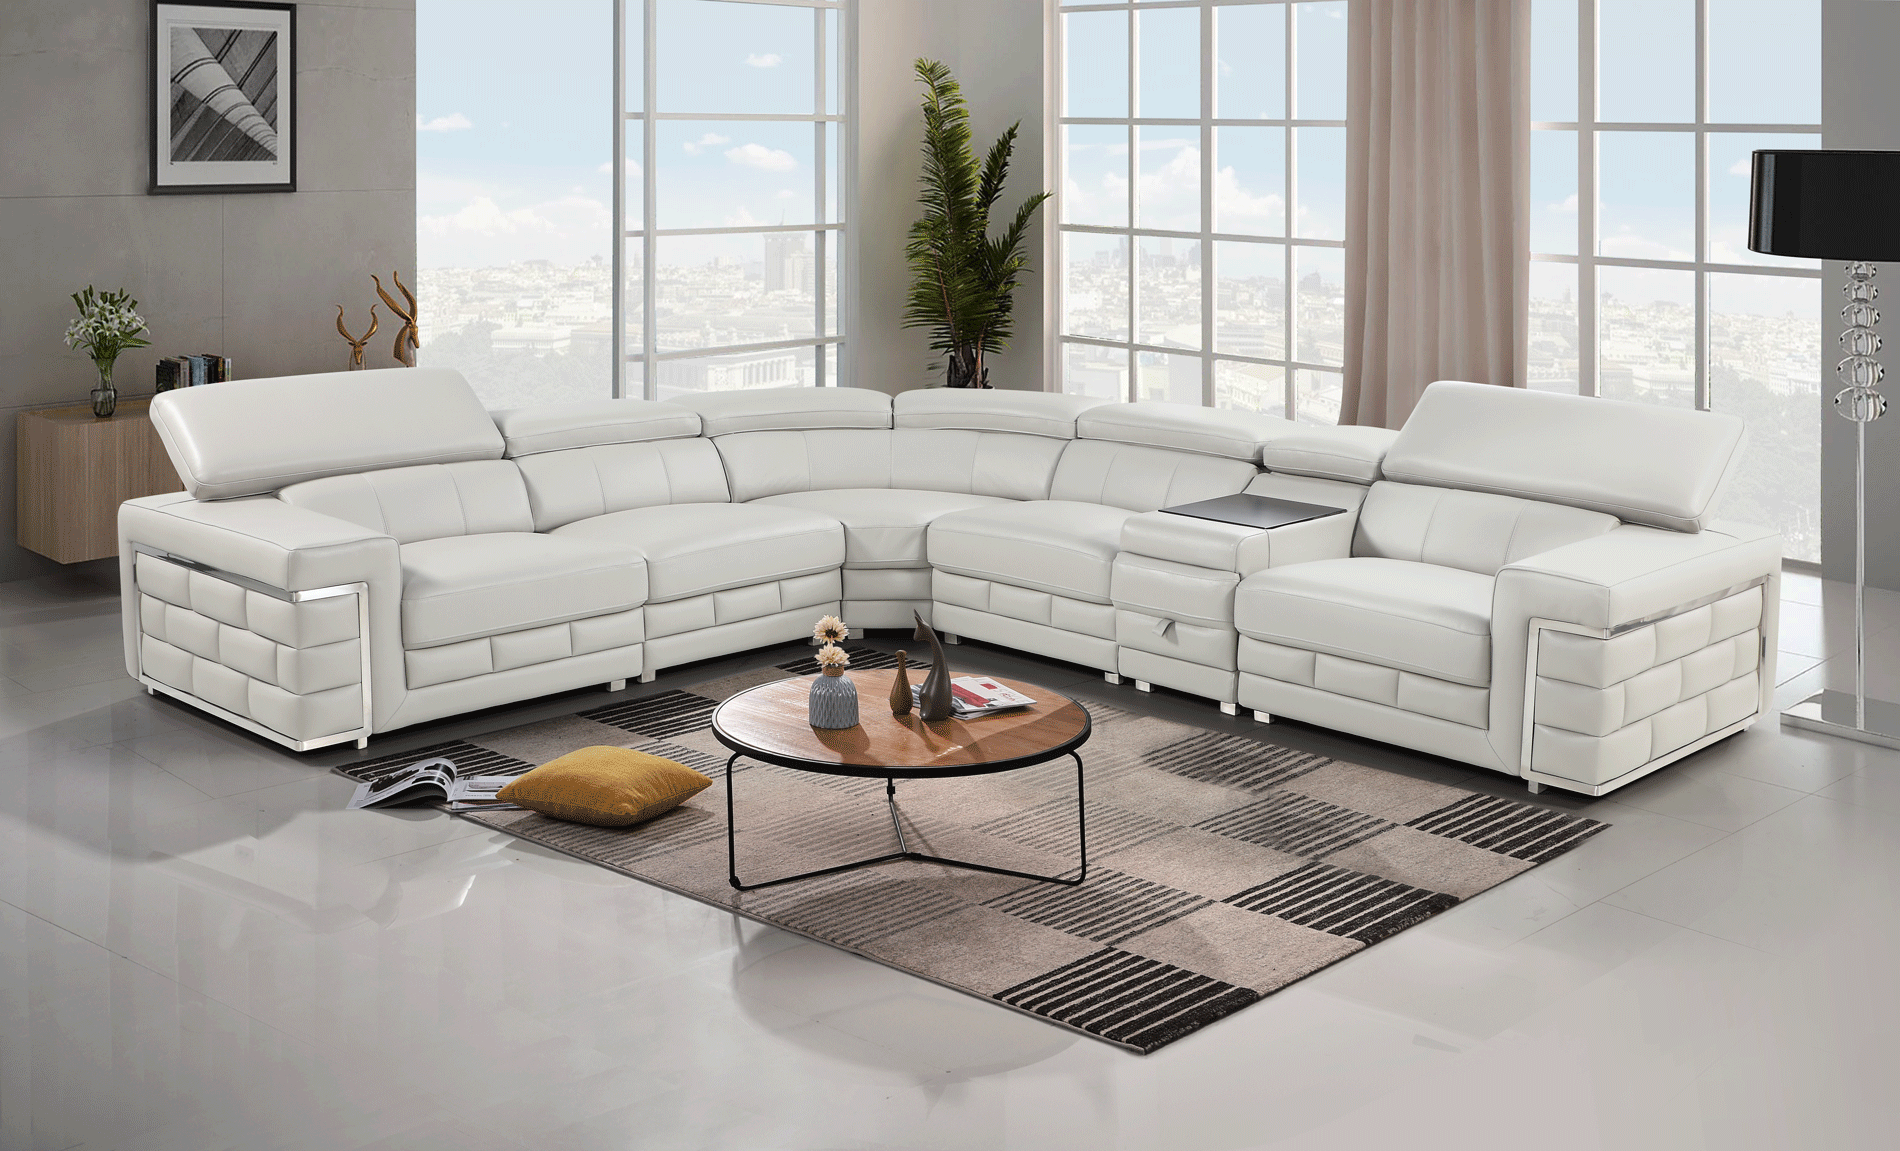 Living Room Furniture Reclining and Sliding Seats Sets 378 Sectional